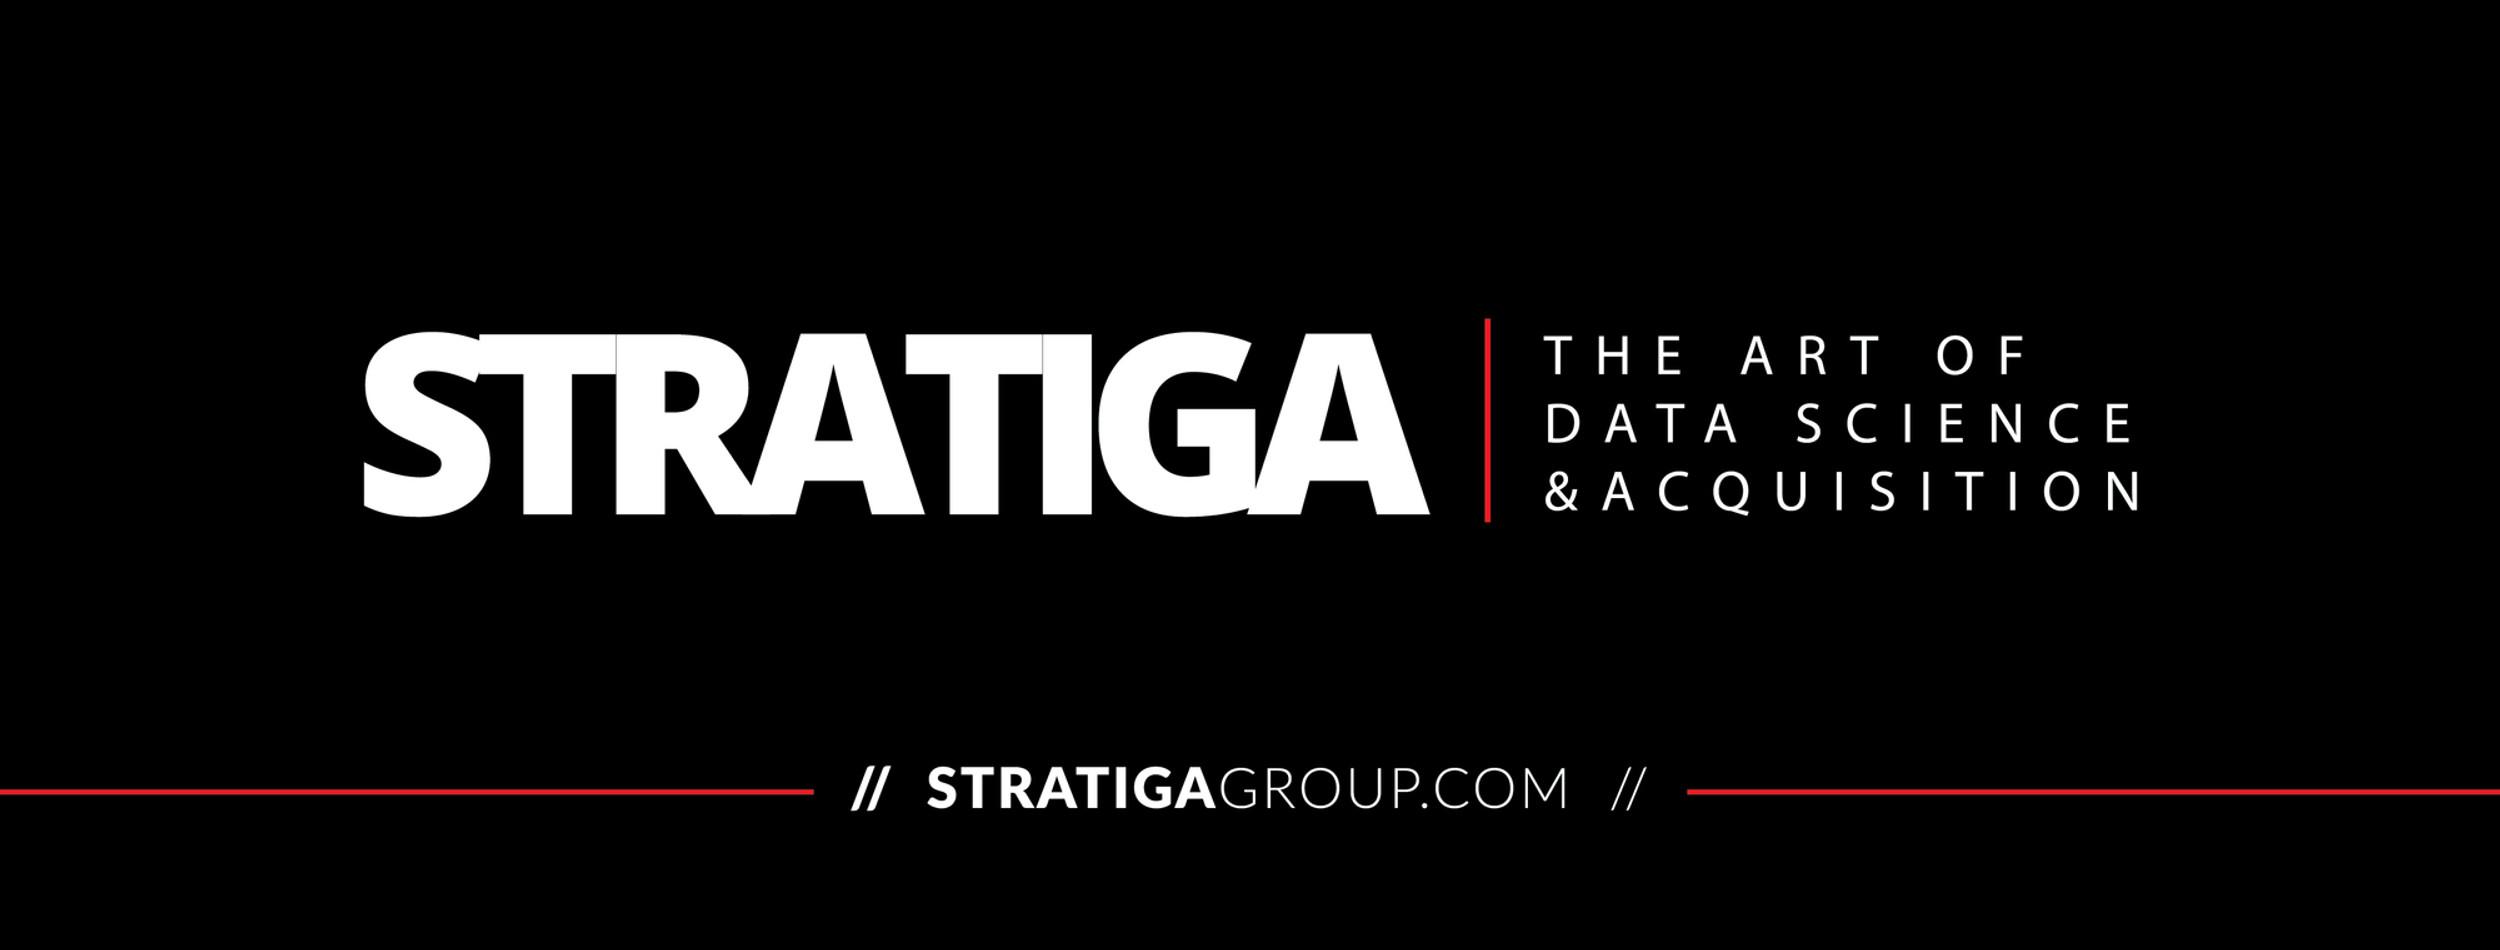 Product Services | Stratiga Group image